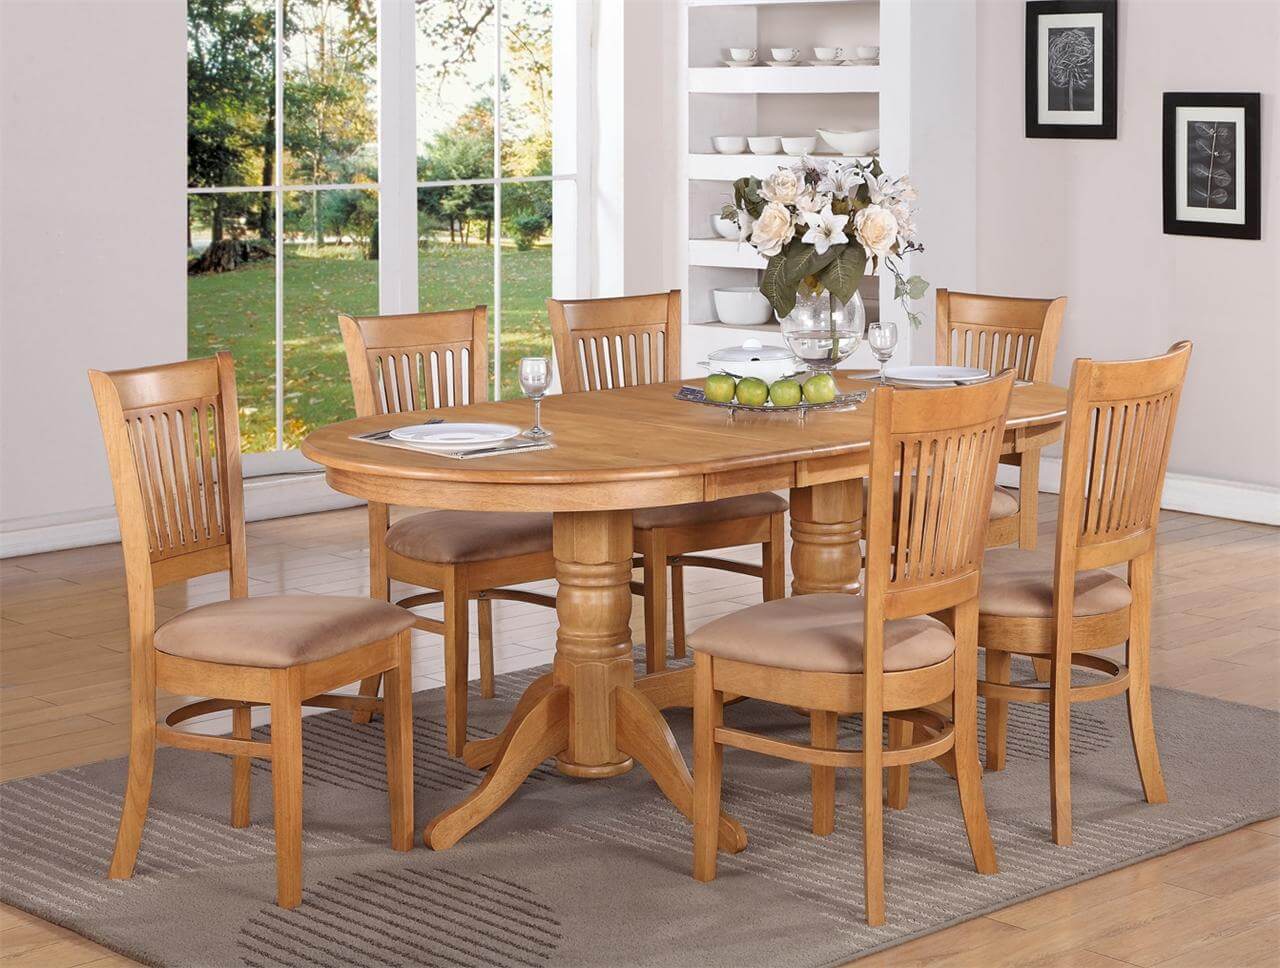 Top 18 King Size Dining Room Sets That You Have Hardly Seen ...